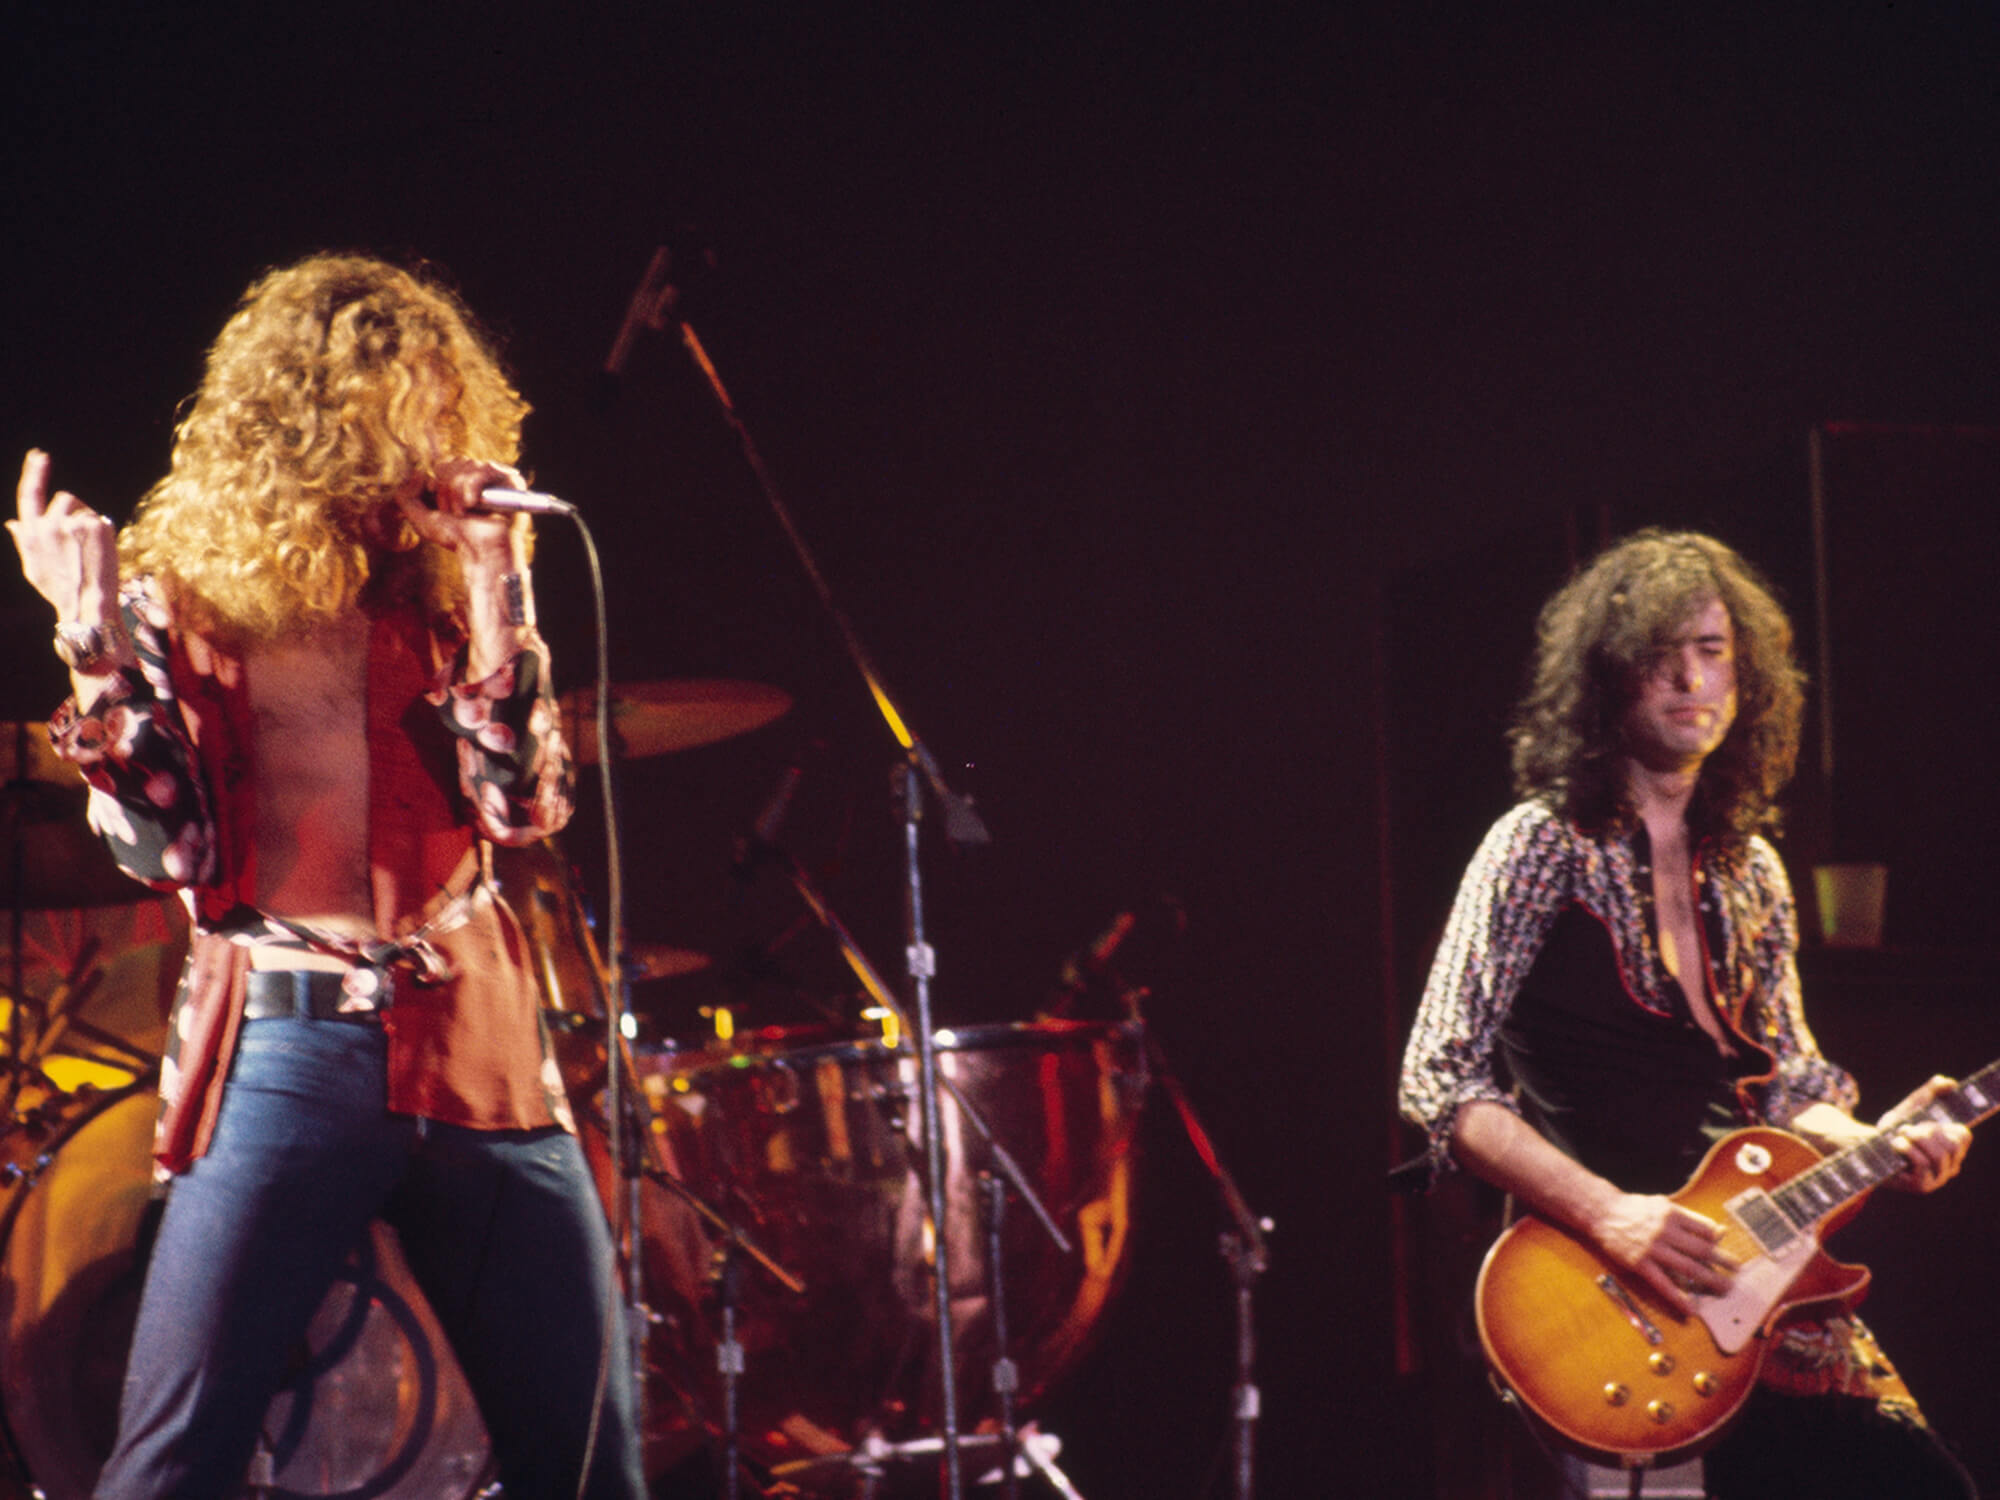 Robert Plant and Jimmy Page of Led Zeppelin onstage in 1975